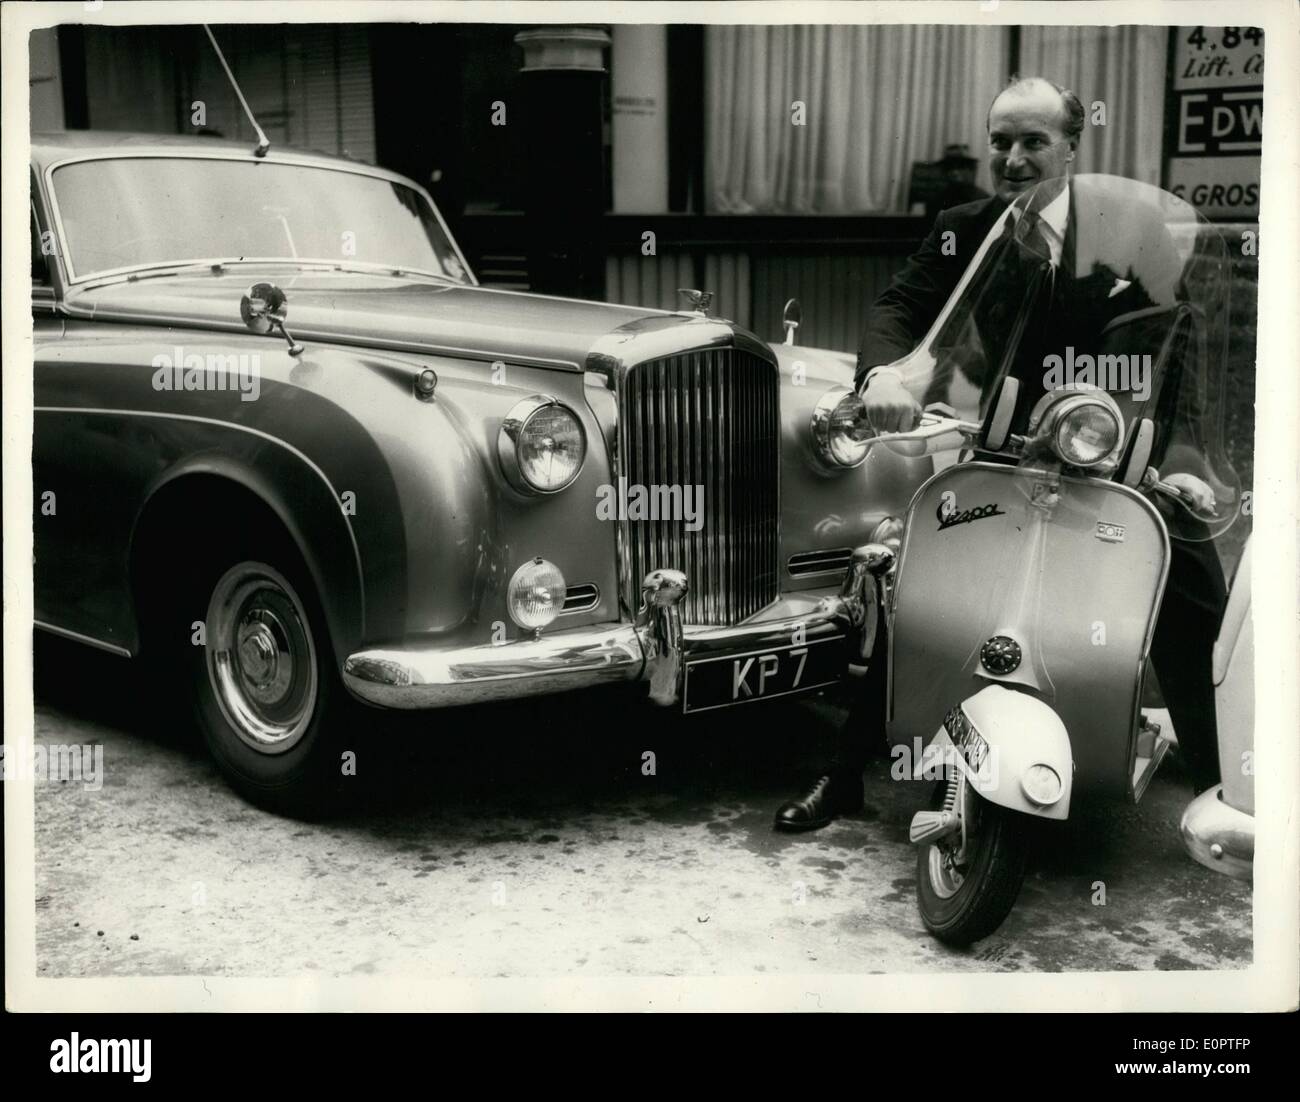 Dec. 12, 1956 - Preparing For The Worst: Mr. Peter Cadbury, Managing Director of Keith Prowse Ltd, of Bond Street, travels to his office in his Bentley car, and then uses his Vespa motor scooter for his business calls -- thus saving petrol. Photo Shows Mr. Peter Cadbury about to set off on his Vespa motor scooter, showing his Bentley car parked on left. Stock Photo